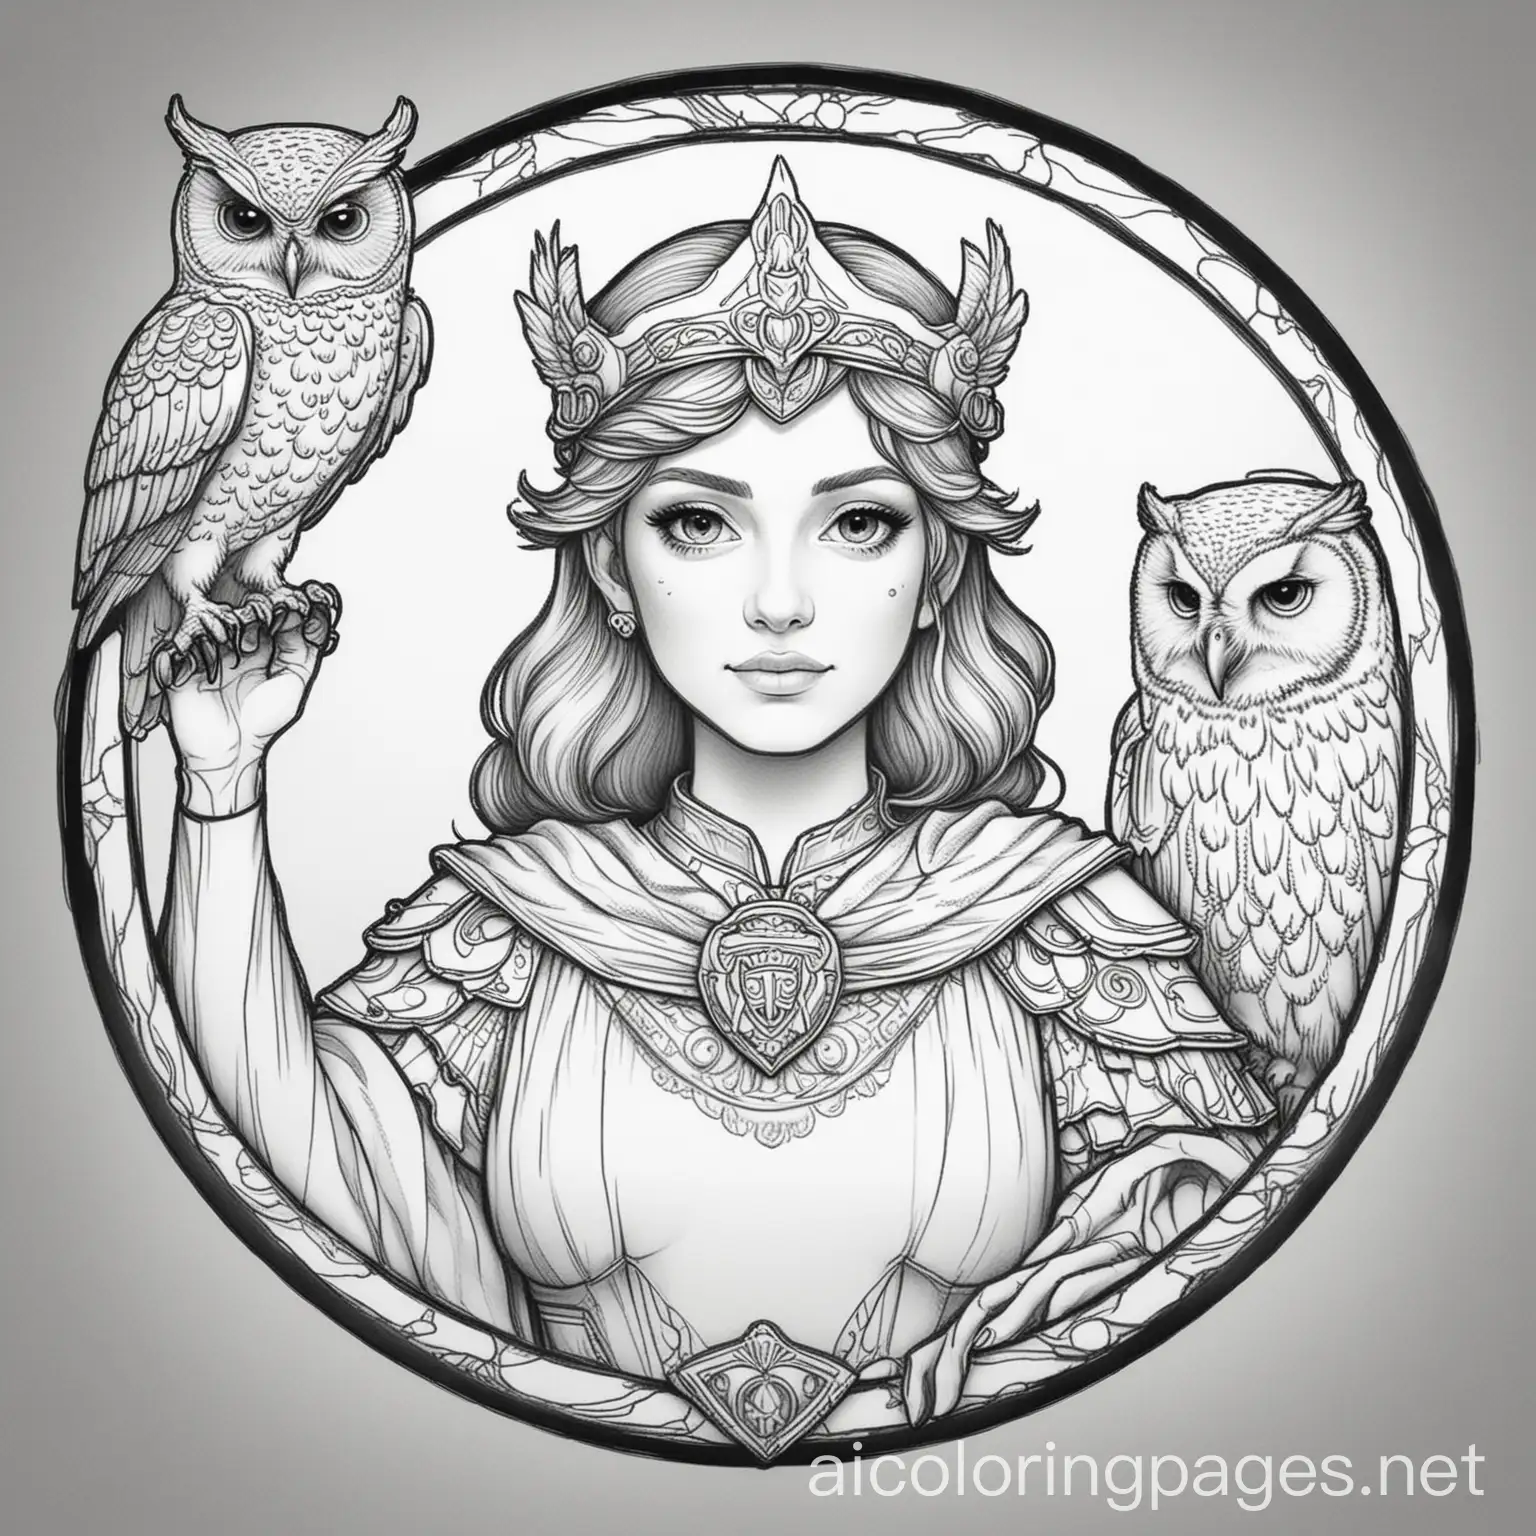 Minerva-Coloring-Page-Goddess-with-Helmet-Shield-and-Owl-in-Black-and-White